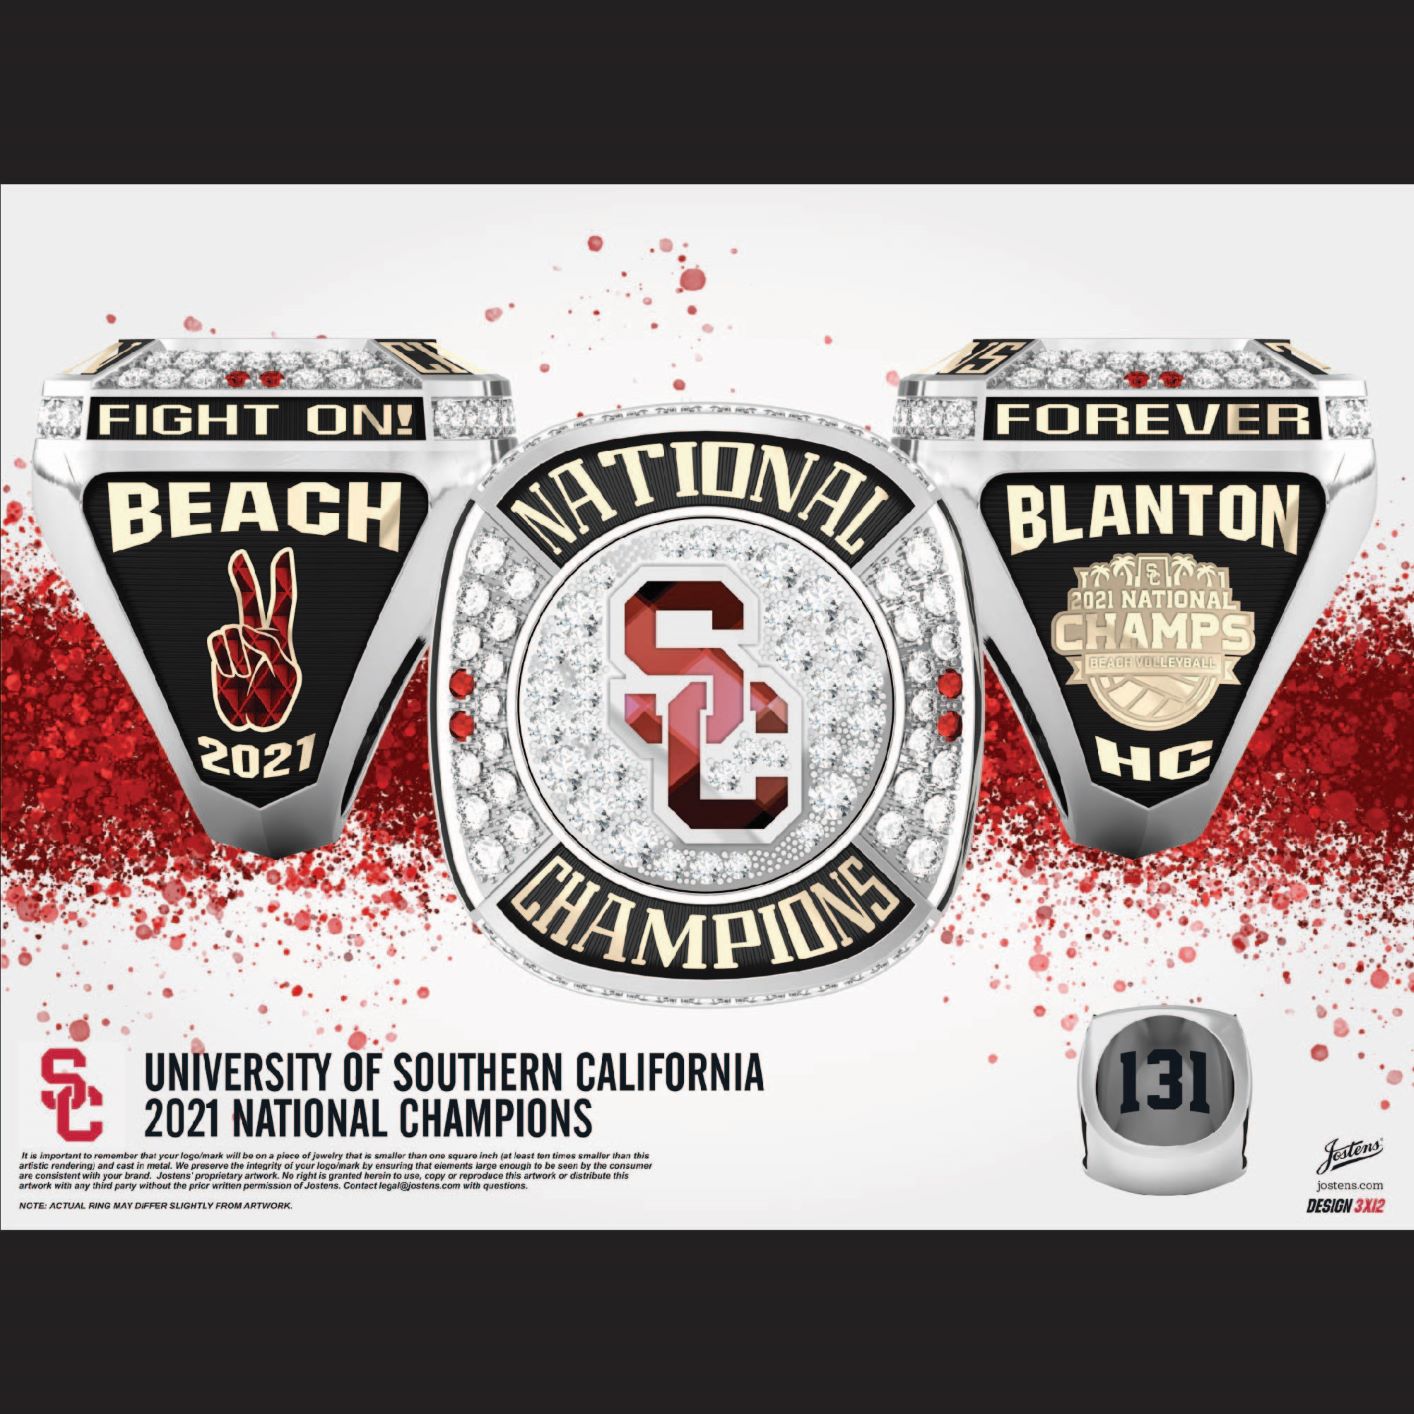 University of Southern California Women's Beach Volleyball 2021 National Championship Ring